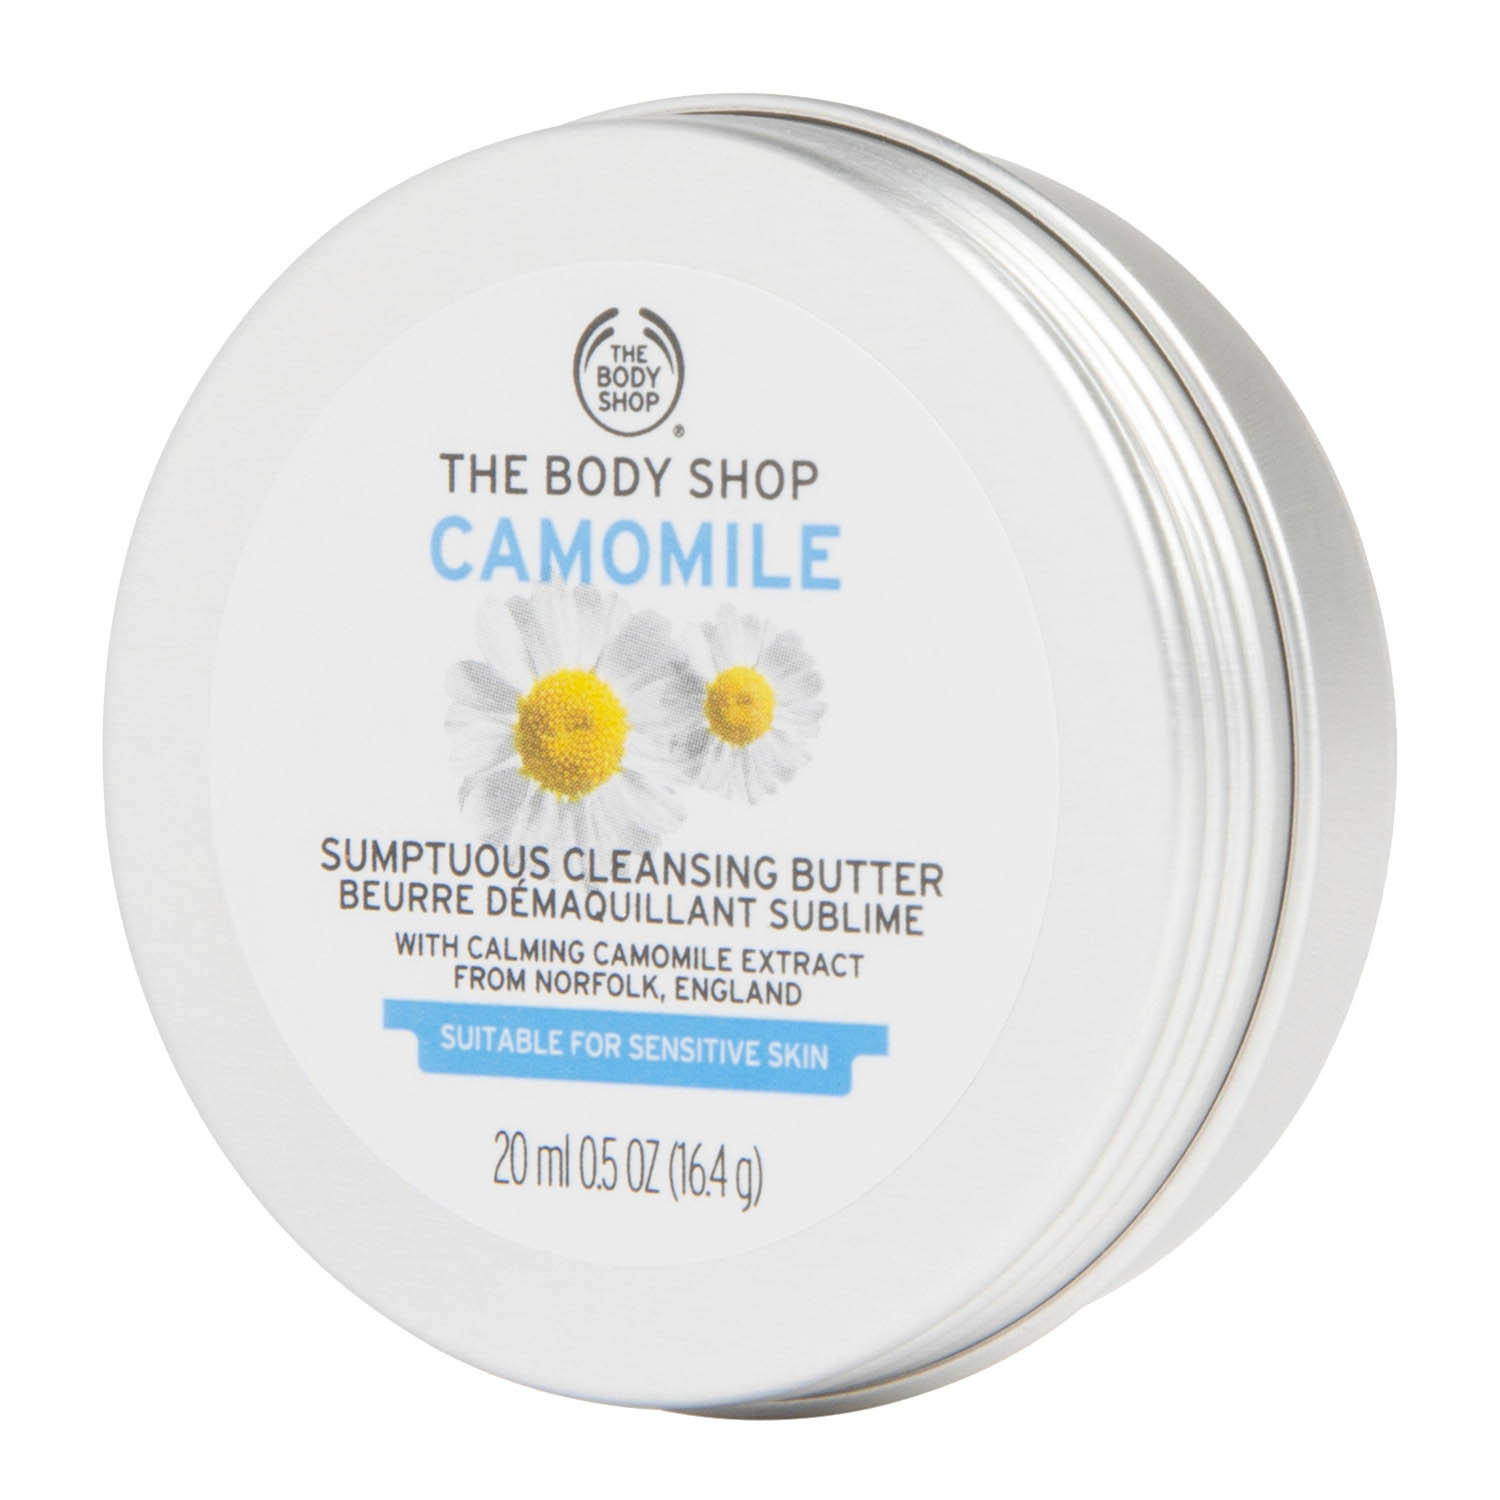 THE BODY SHOP Camomile Sumptuous Cleansing Balm Butter Kamille Dose